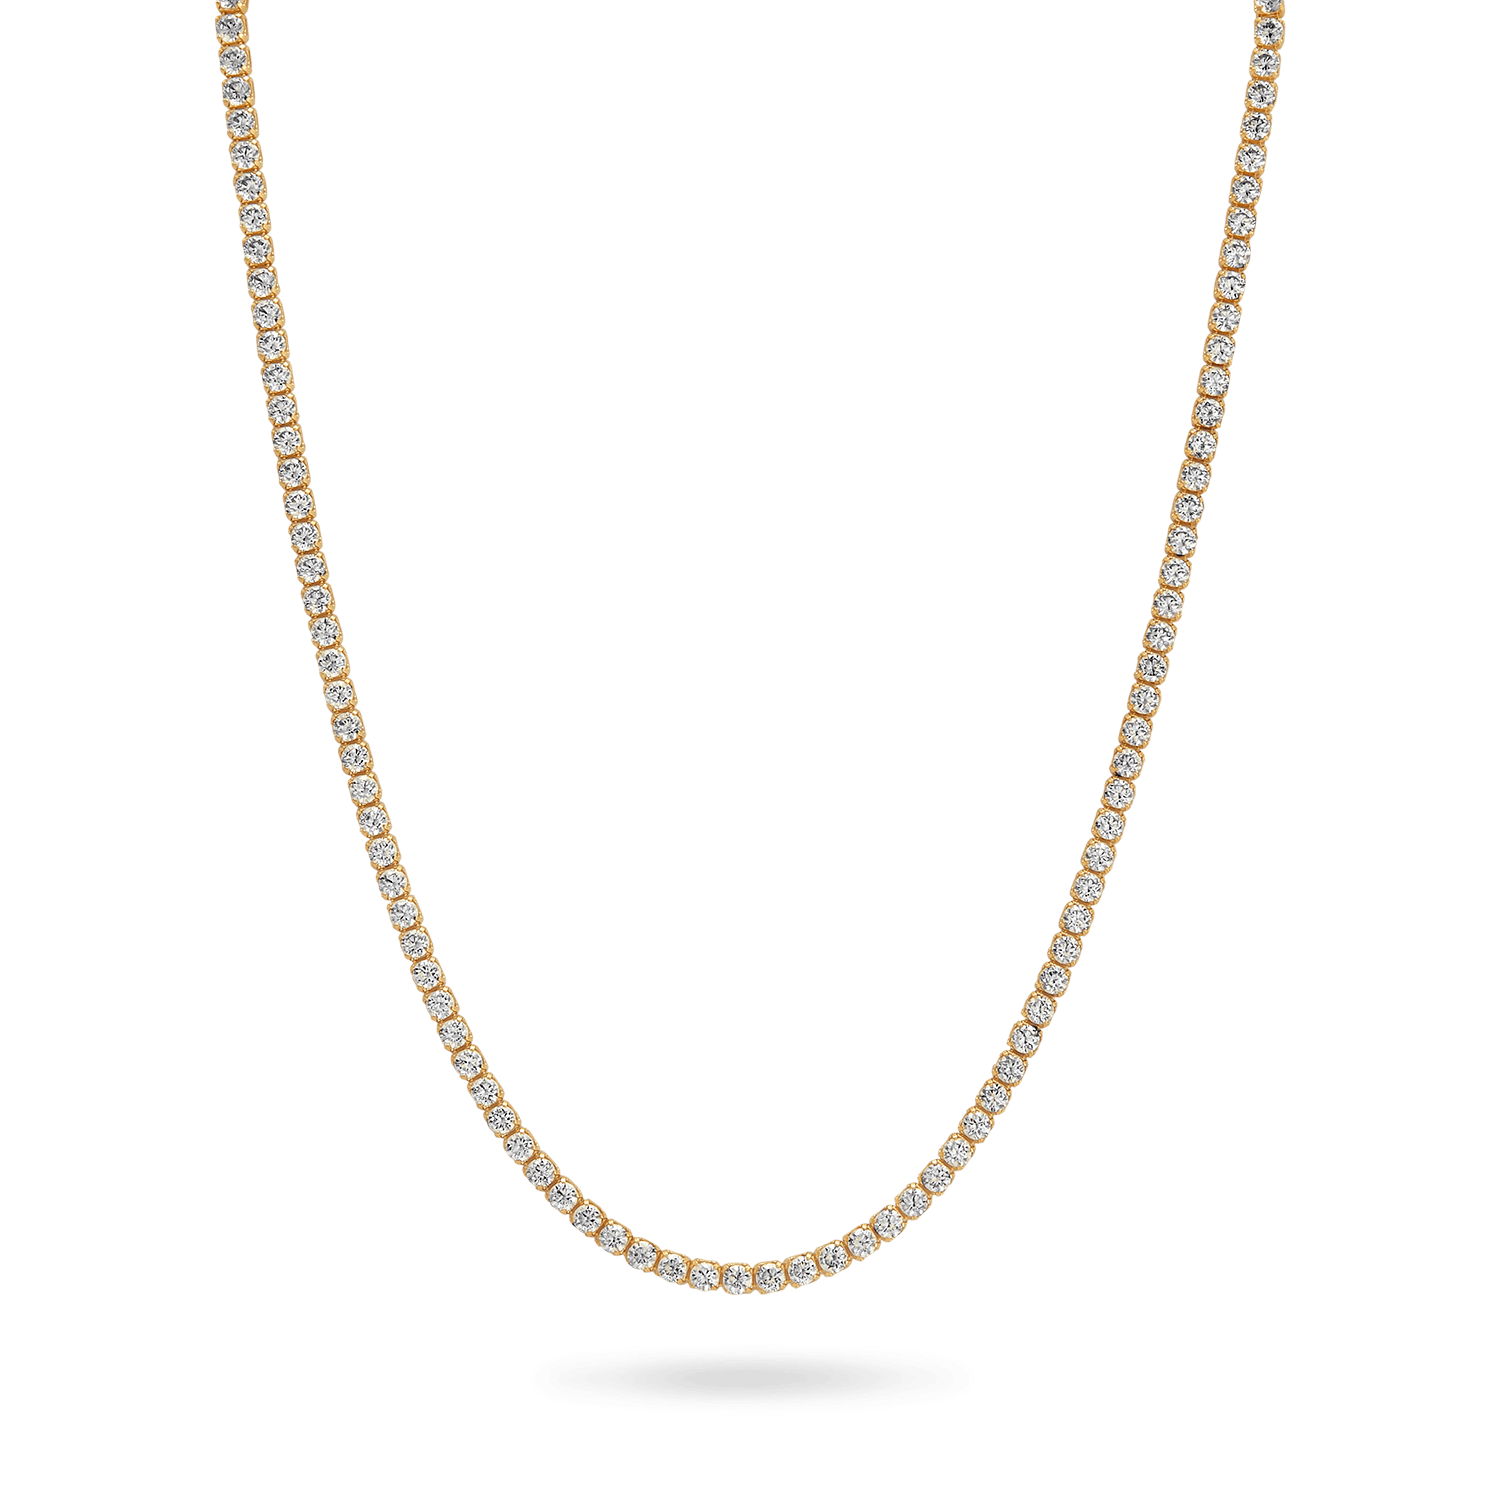 10K Gold Moissanite Tennis Necklace Necklaces IceLink-CAL   